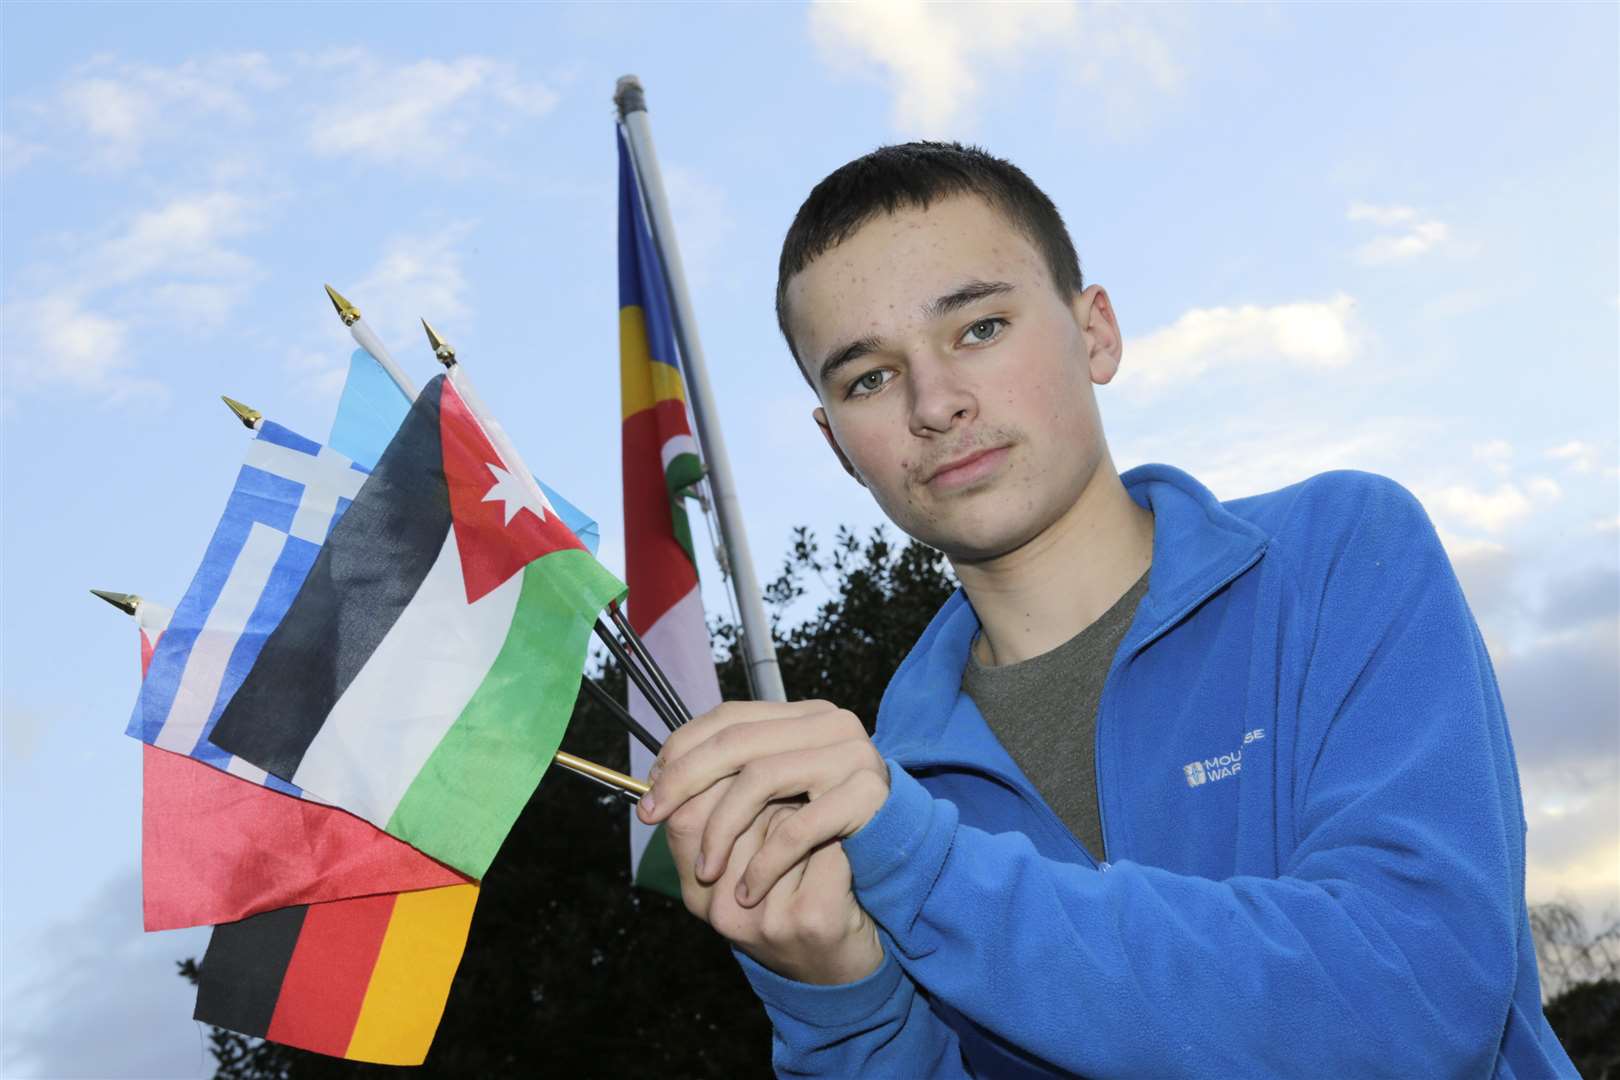 Liam, 14, with some of his vast collection of flags